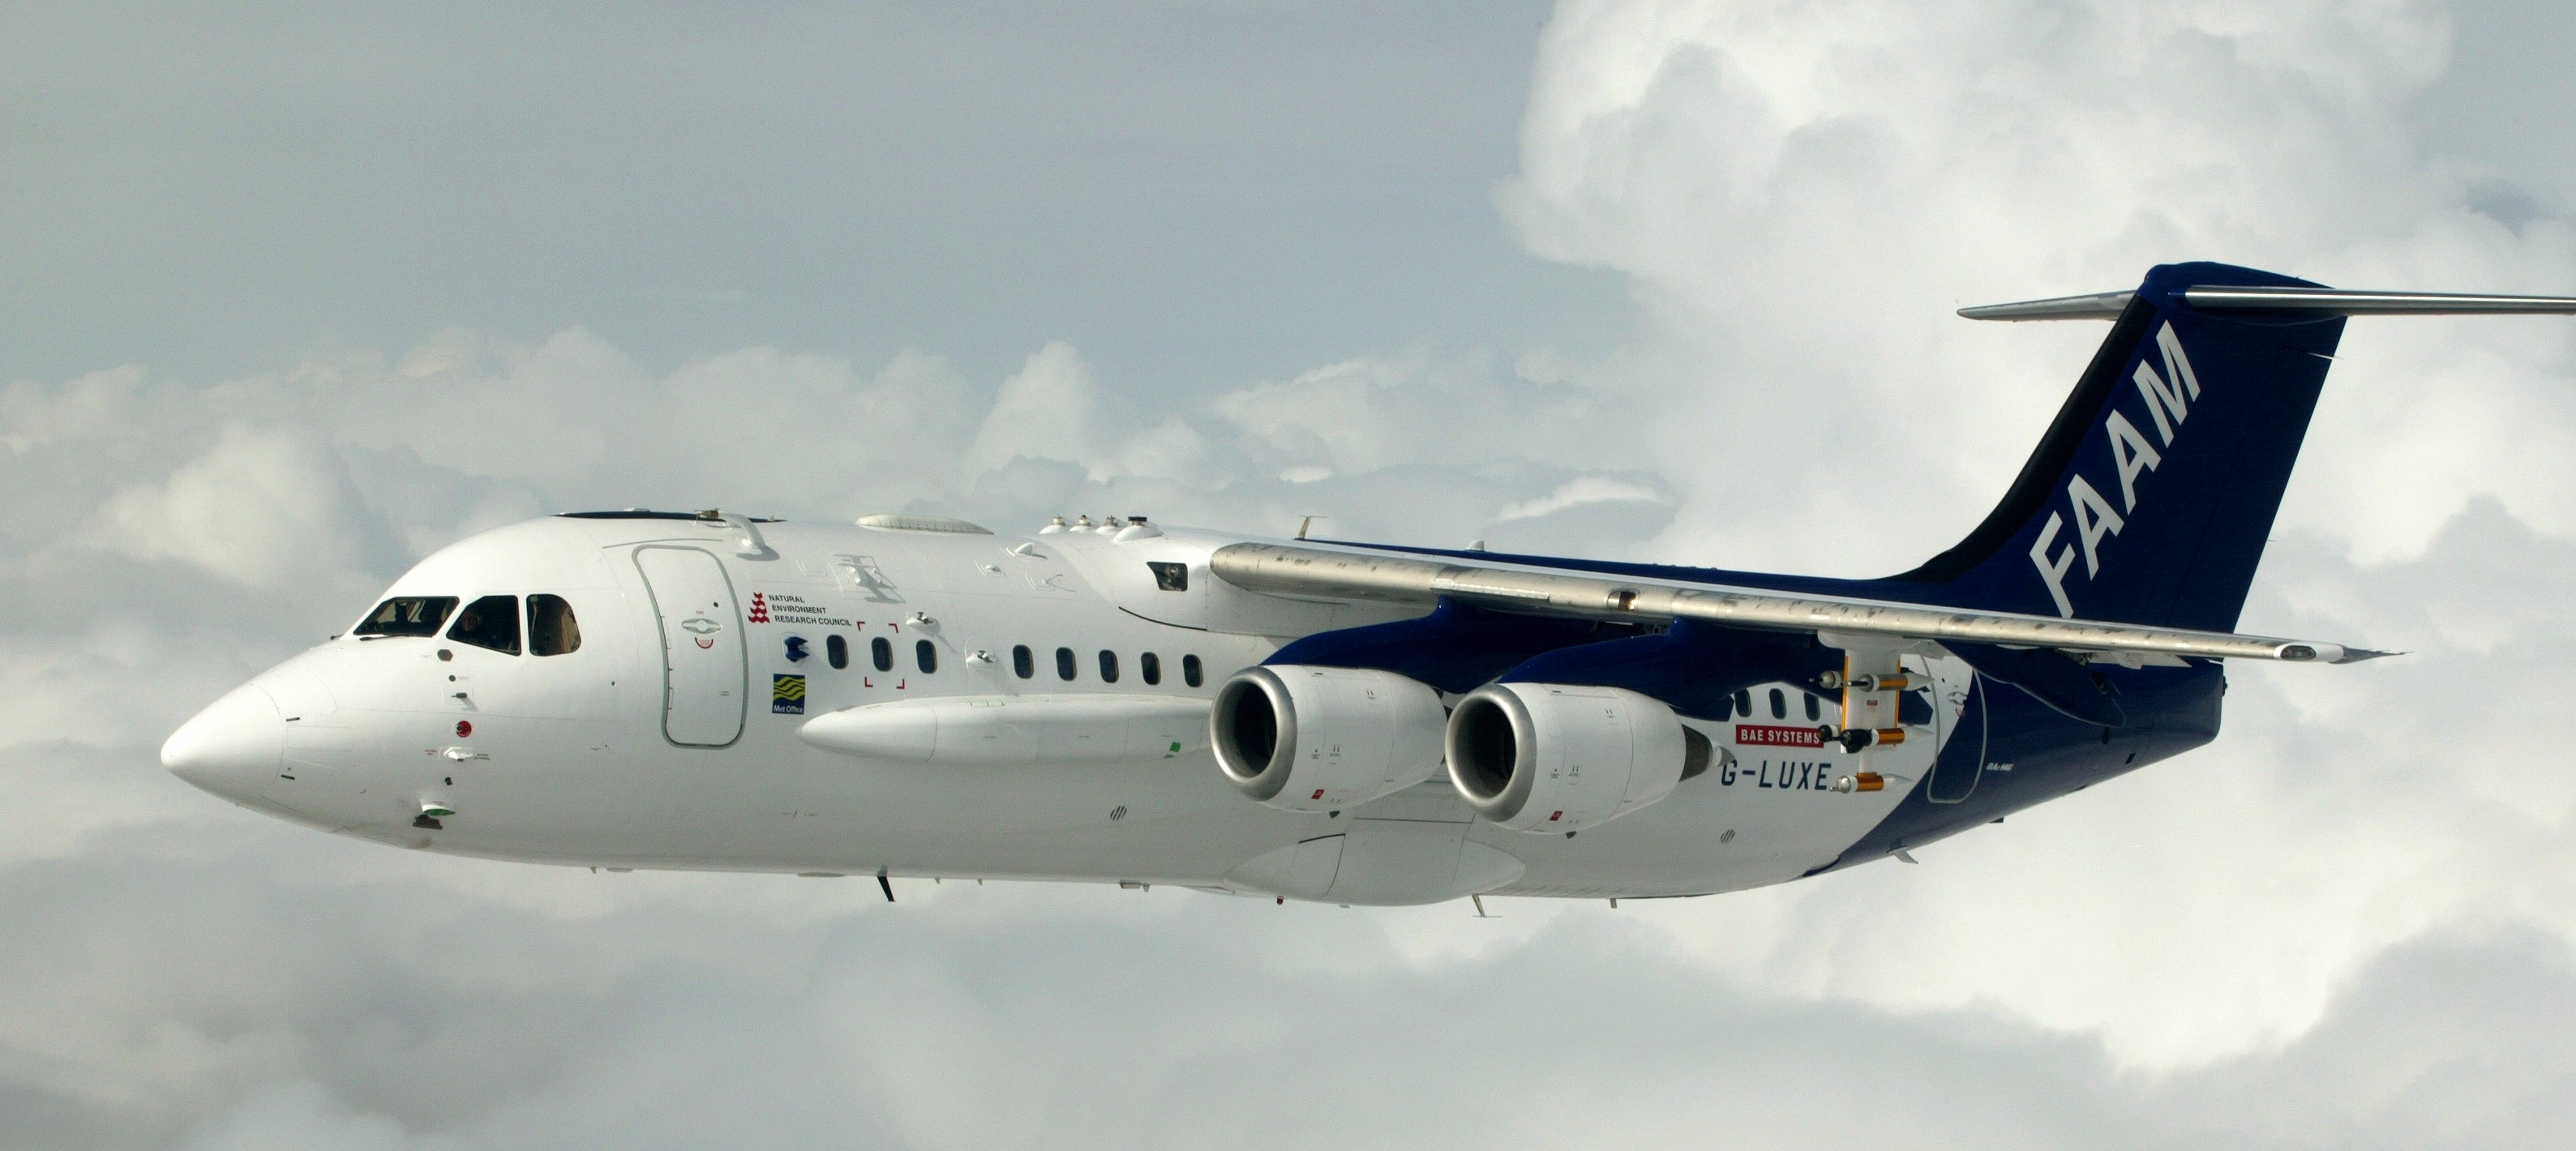 BAe 146 aircraft, The Wessex convection experiment, MET Office research, Meteorological data, 3180x1420 Dual Screen Desktop